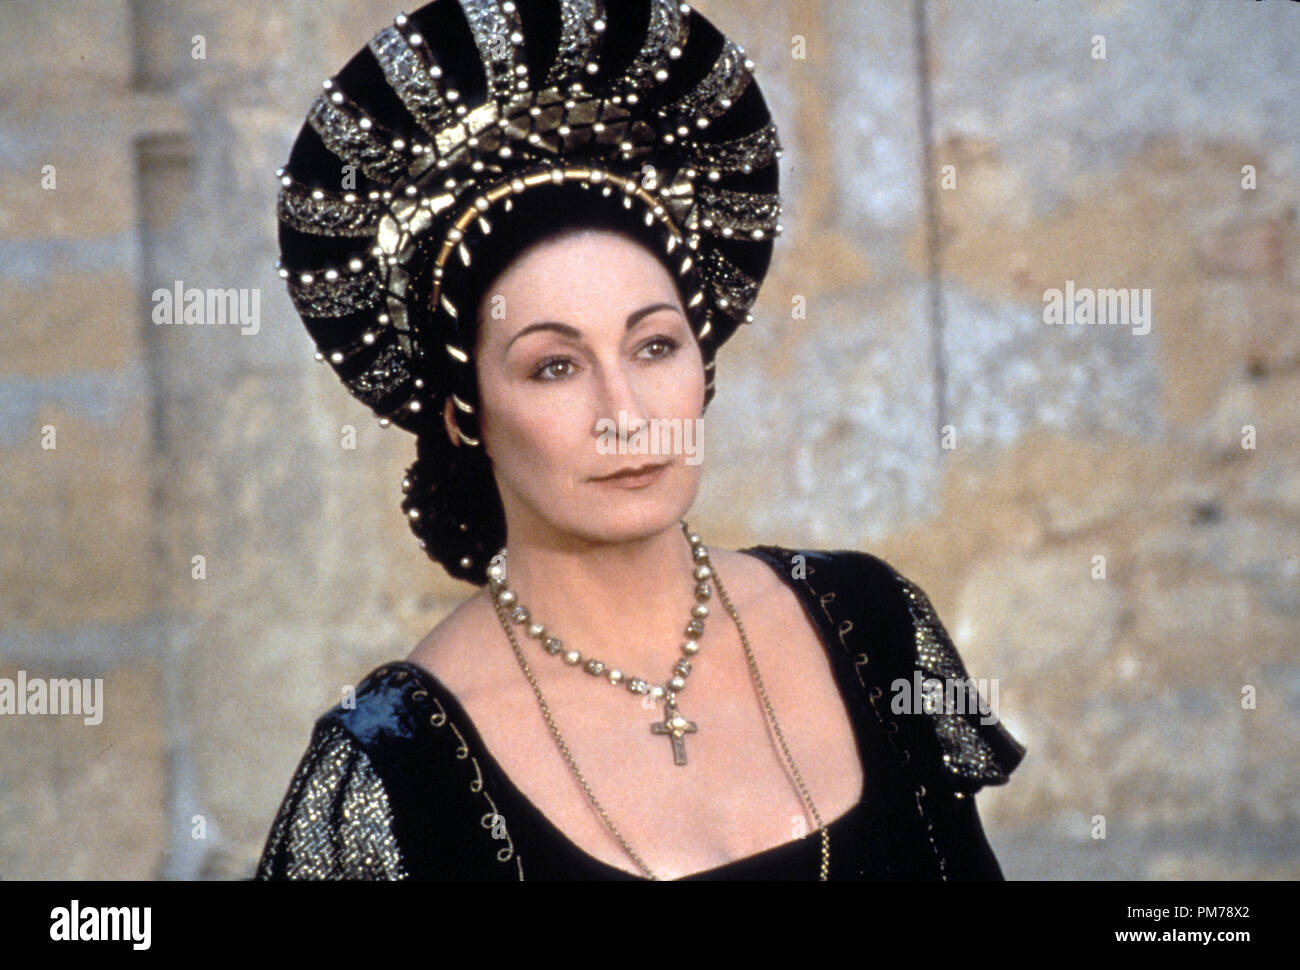 film-still-from-ever-after-anjelica-huston-1998-20th-century-fox-photo-credit-stephen-morley-file-reference-30996547tha-for-editorial-use-only-all-rights-reserved-PM78X2.jpg